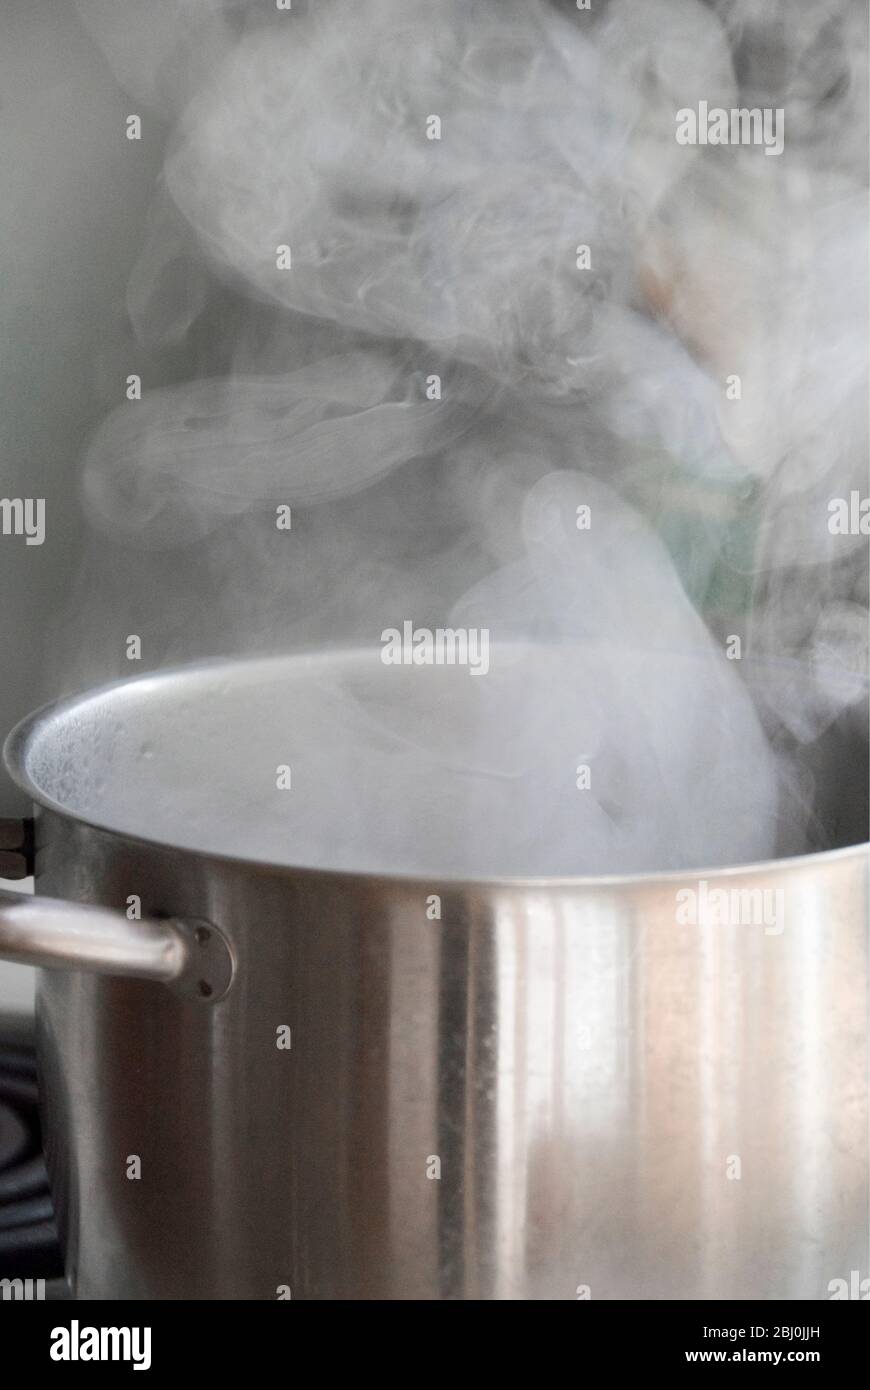 Steam from water boiling in stainless steel saucepan on hob - Stock Photo